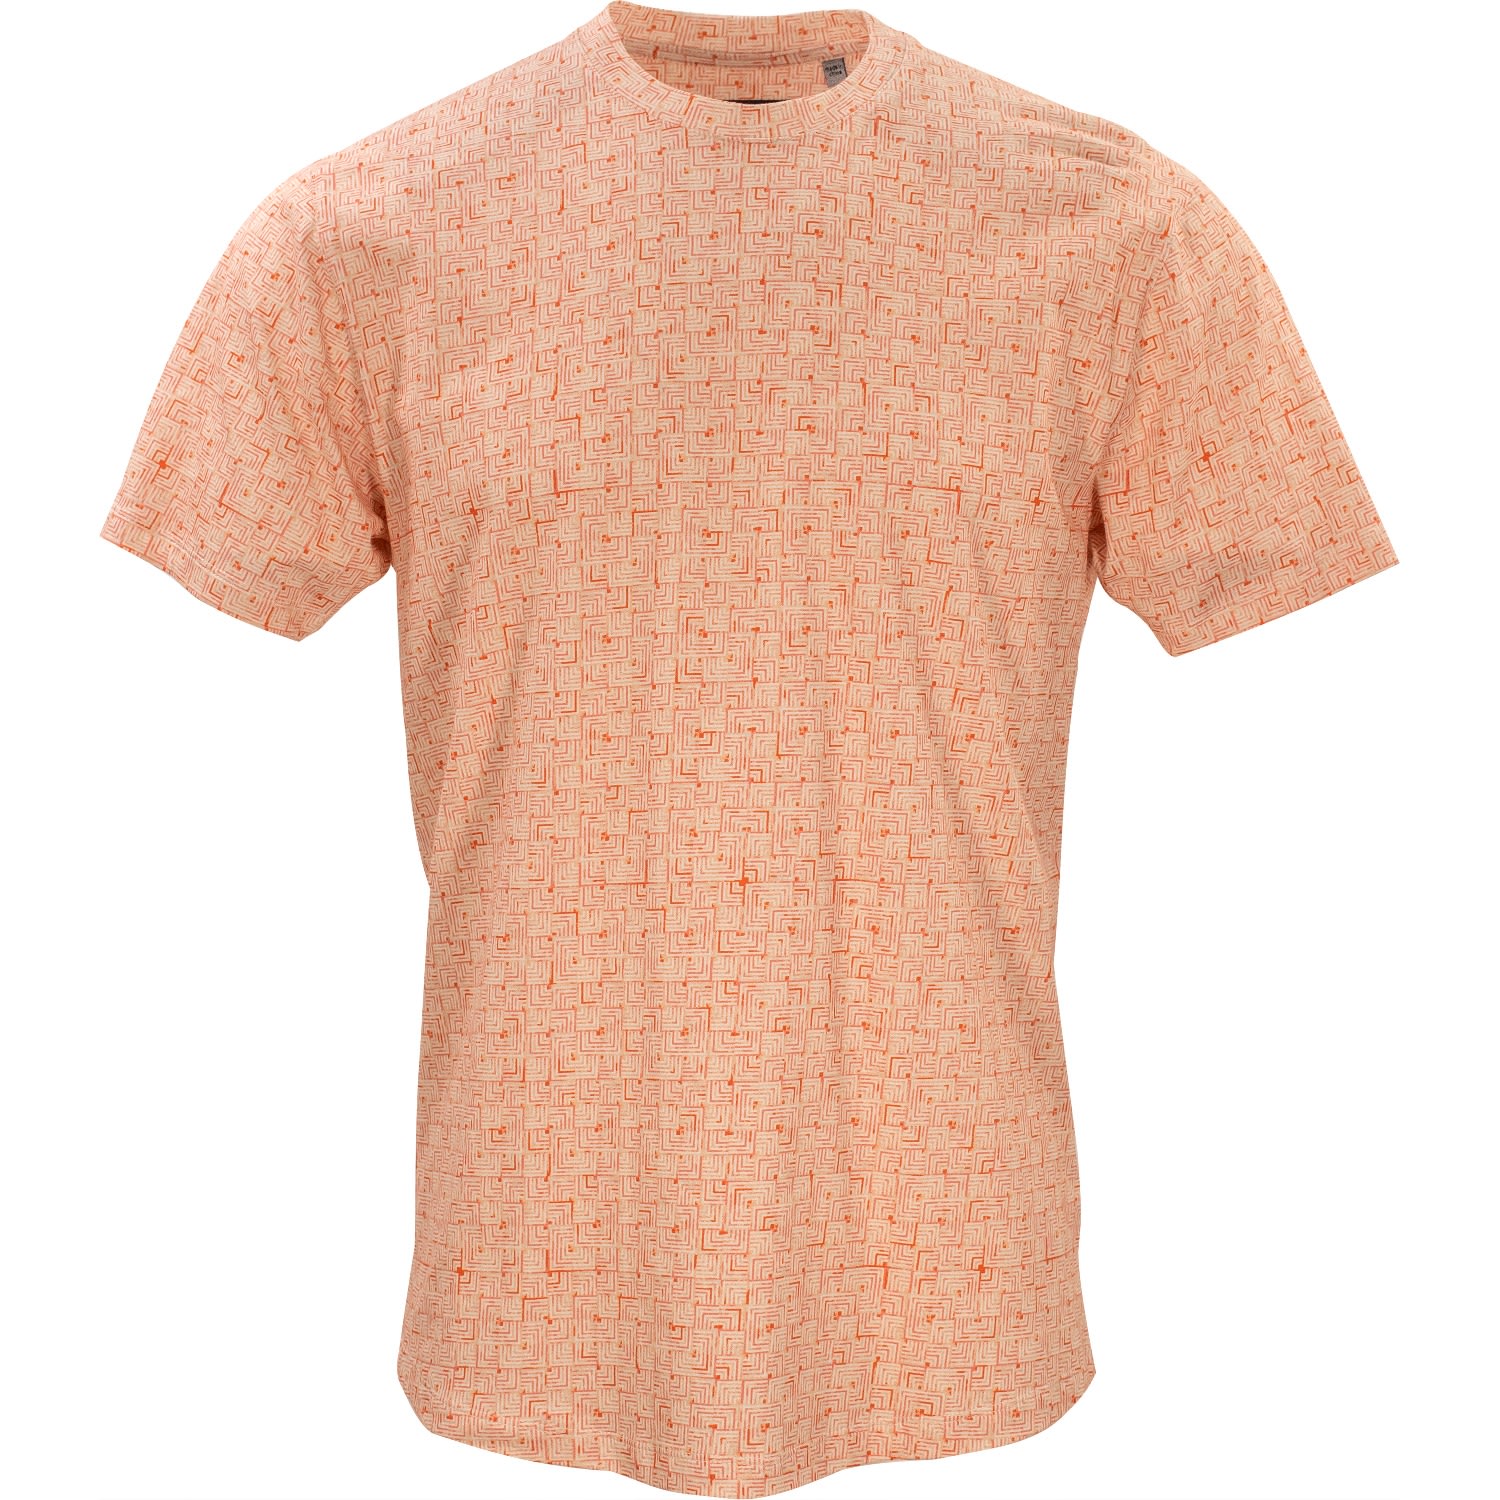 Men’s Yellow / Orange Taylor Parquet - Peach Extra Small Lords of Harlech